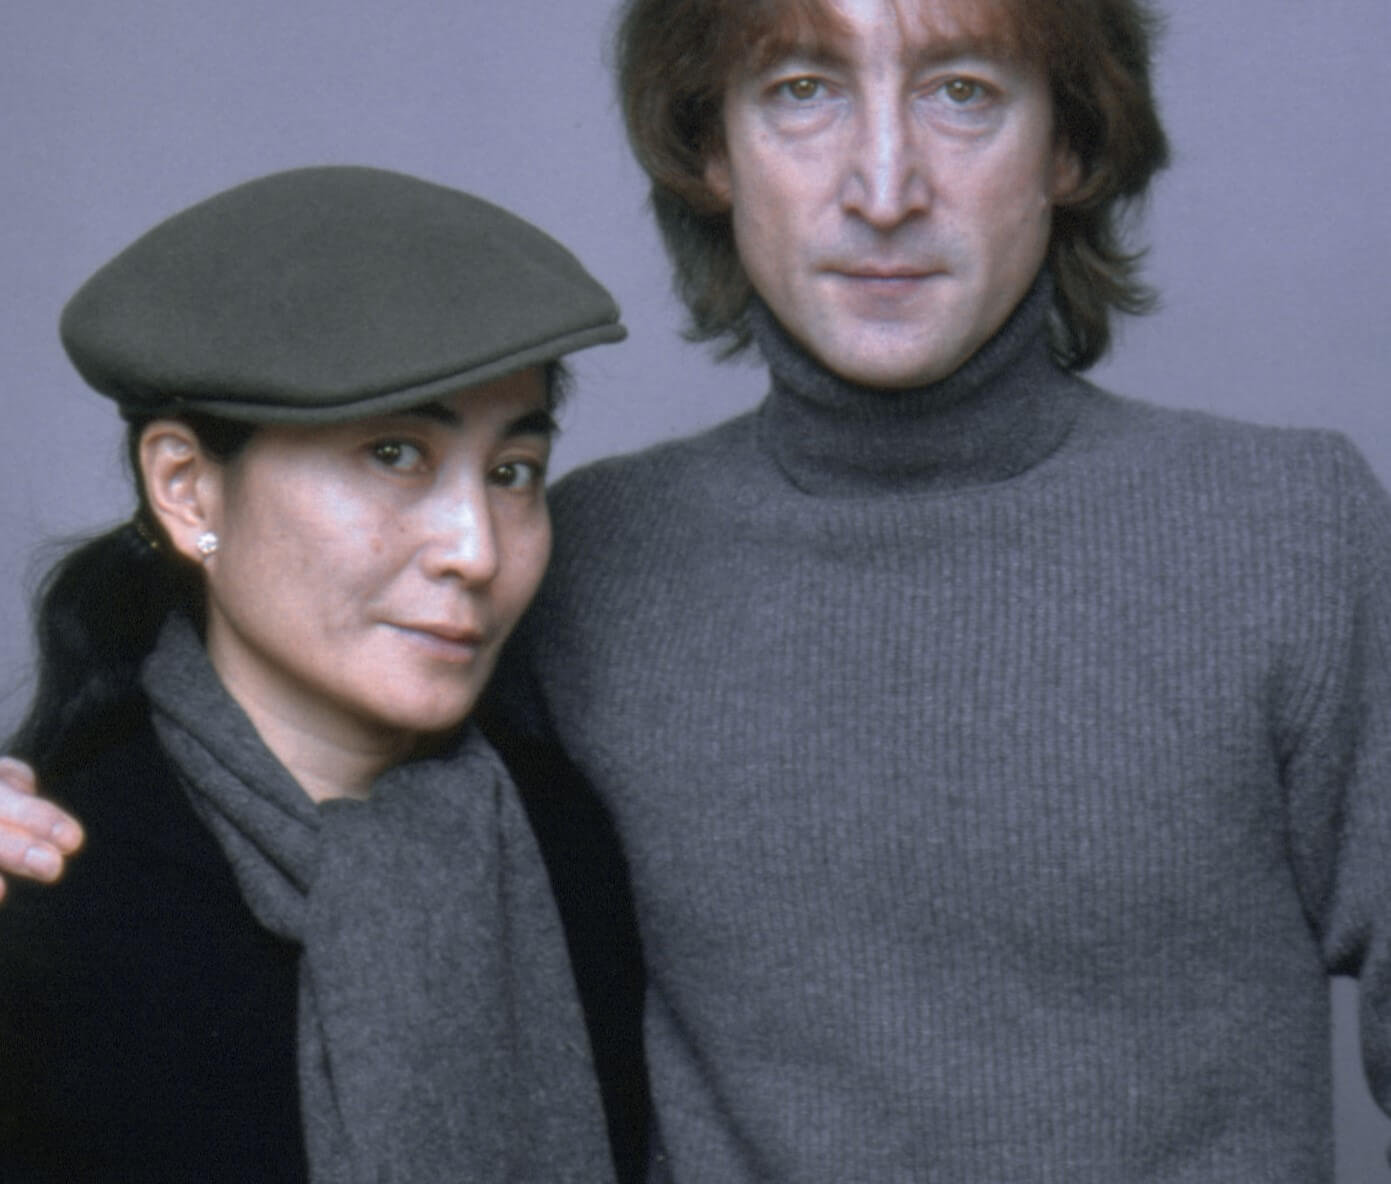 Yoko Ono and John Lennon in front of a gray background